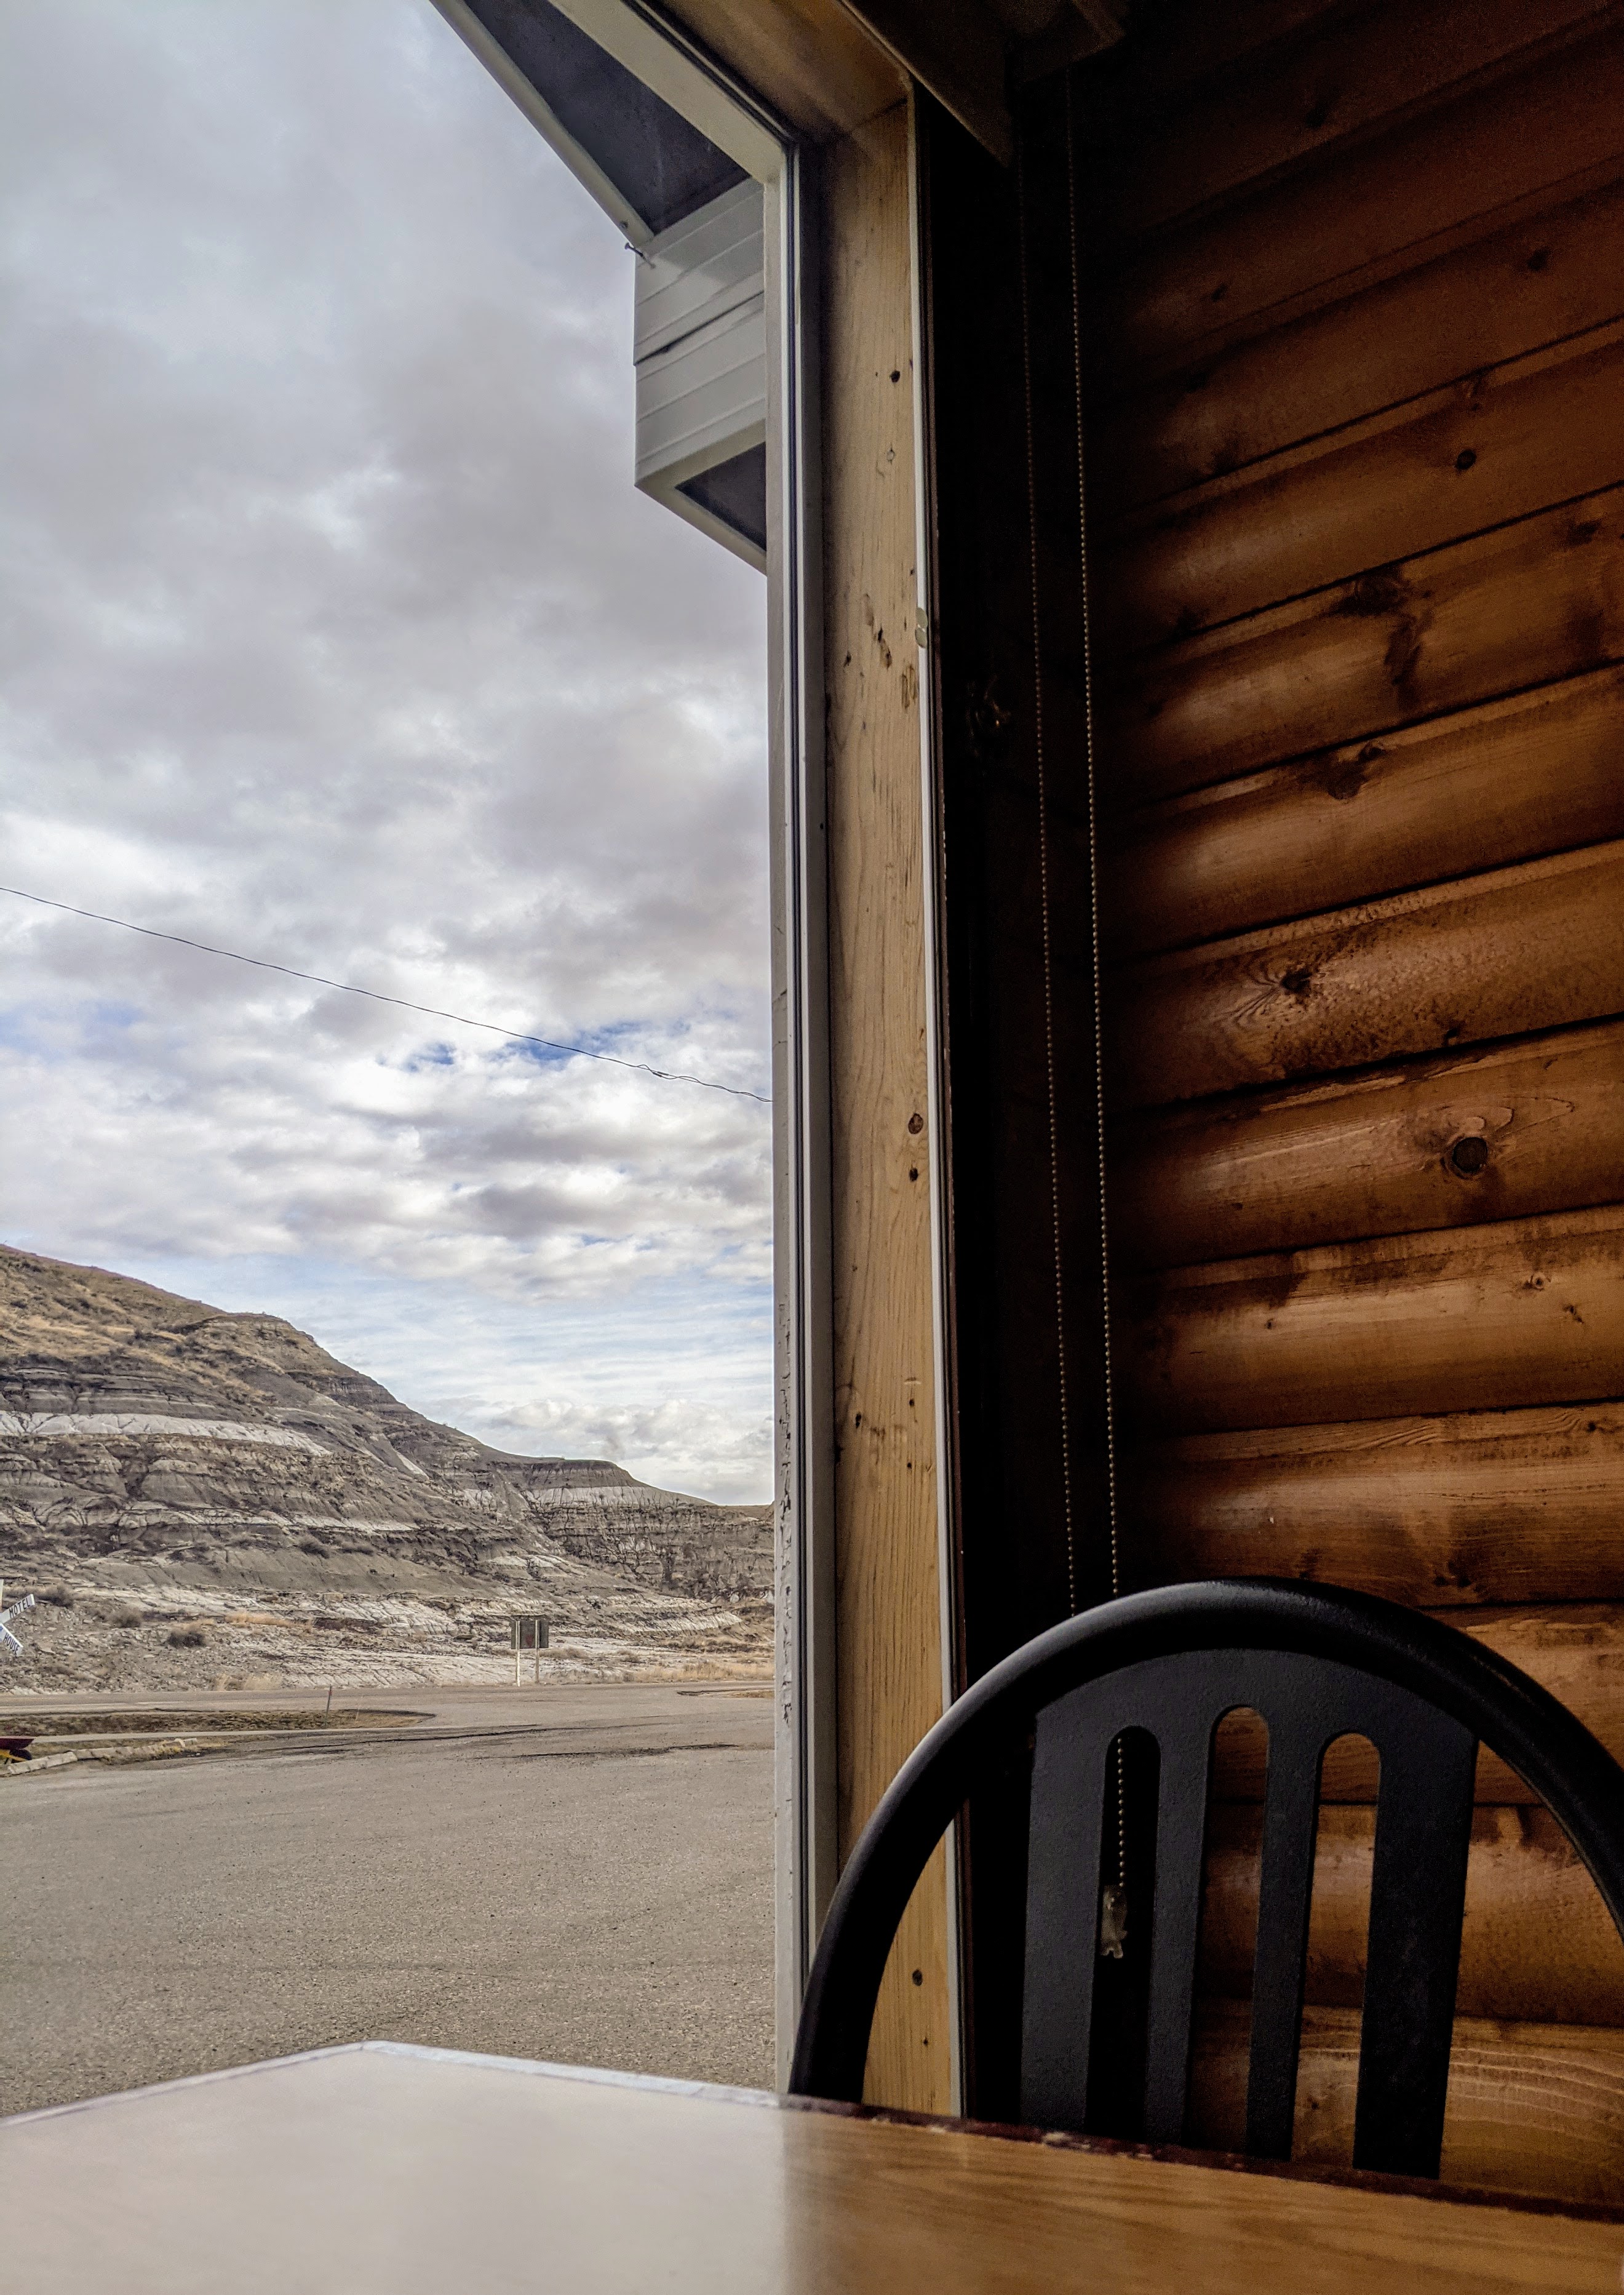 view from a window looking at the badlands landscape